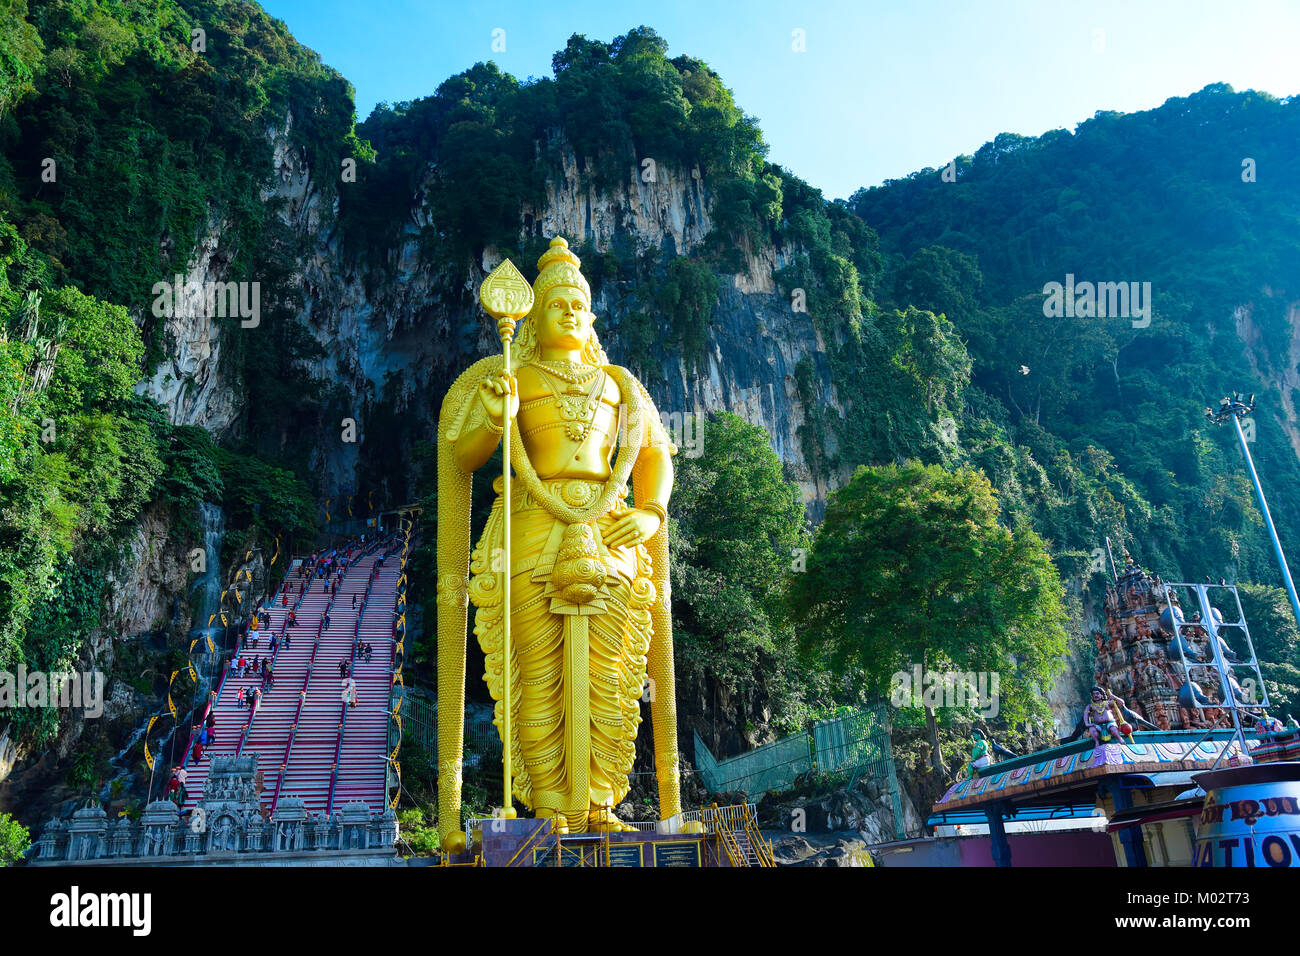 Murugan Statue, giant golden figures at Batu Caves, Kuala Lumpur, one of the most famous destination in Malaysia Stock Photo